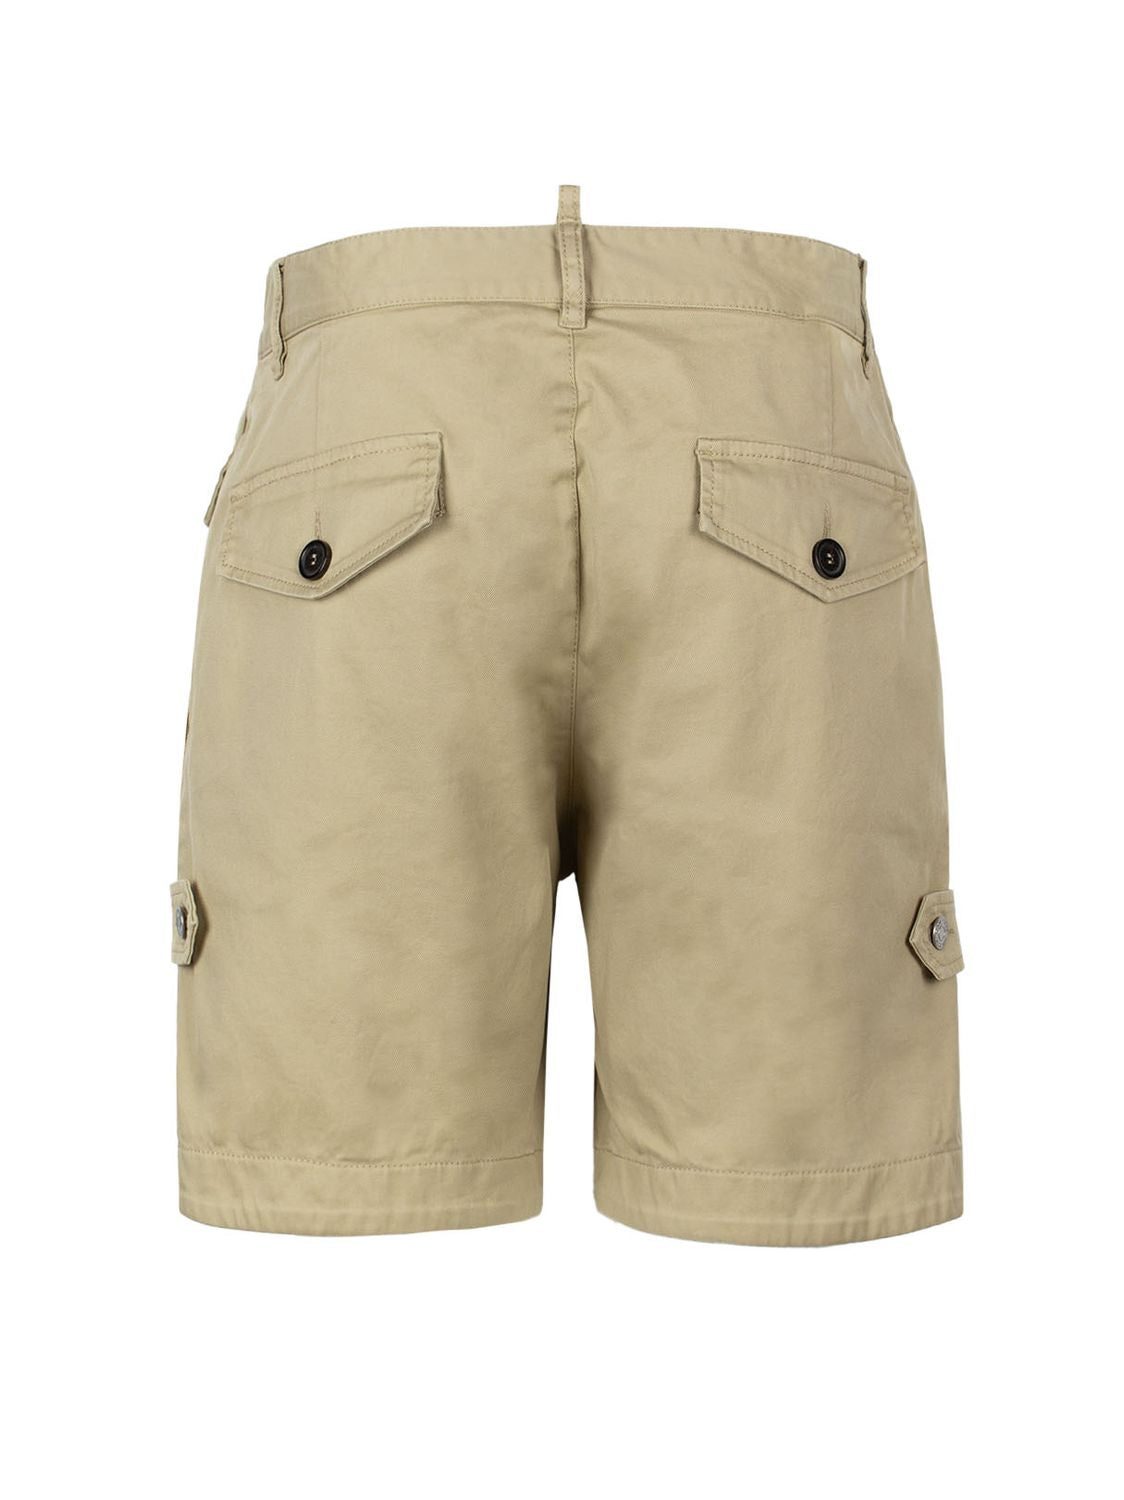 DSQUARED2 Men's Beige Heritage Cargo Shorts with Contrasting Trim